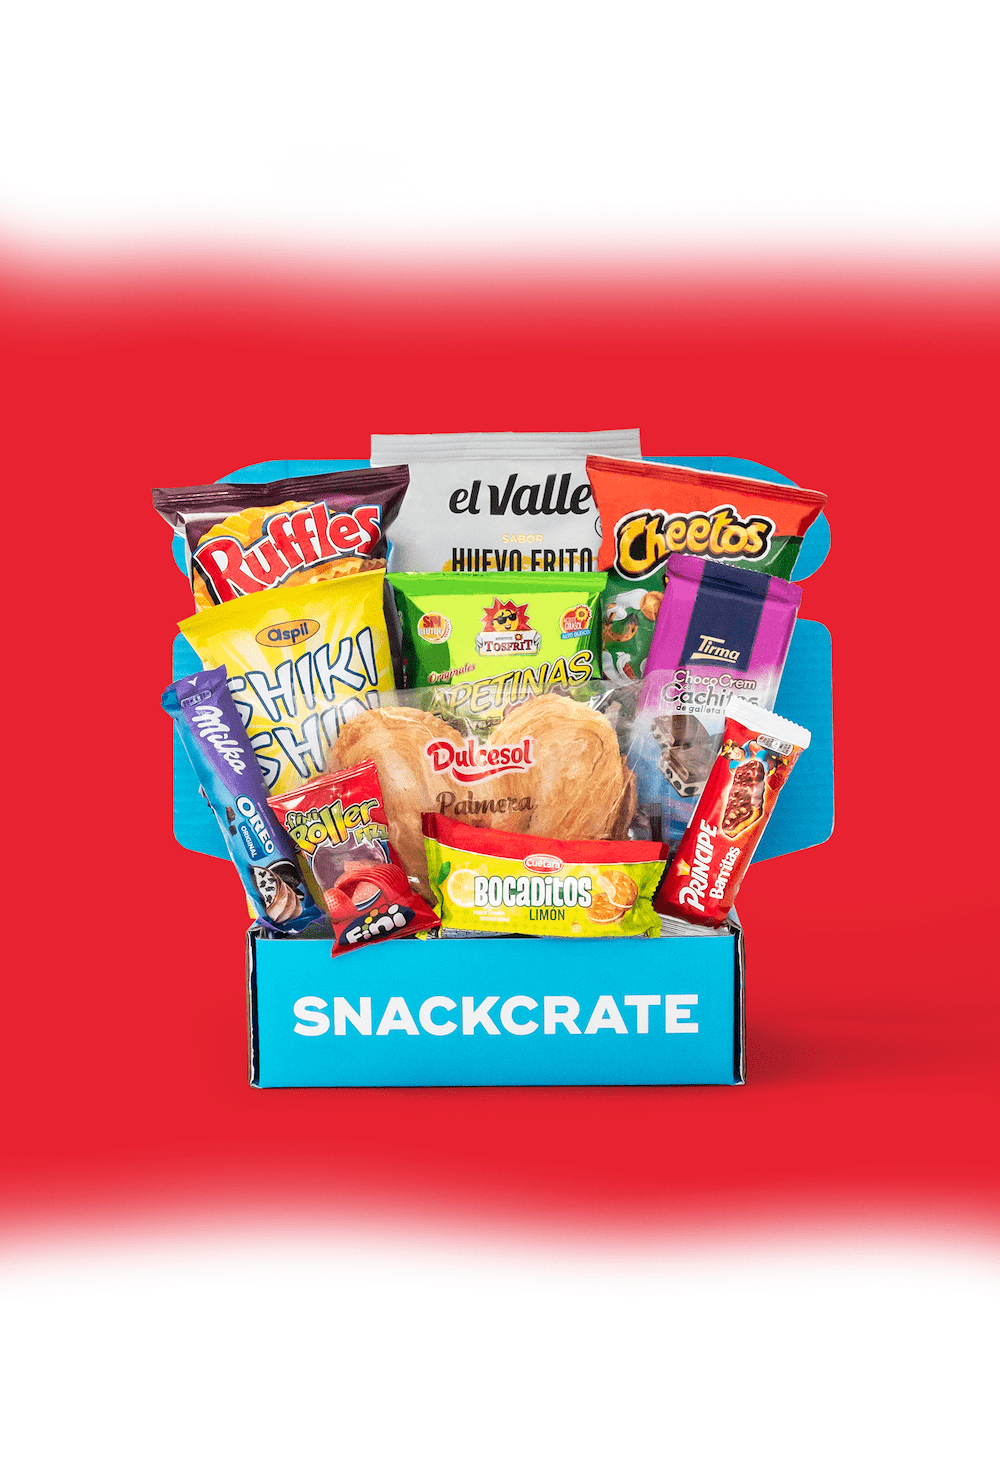 Spain snackcrate full of foreign snacks